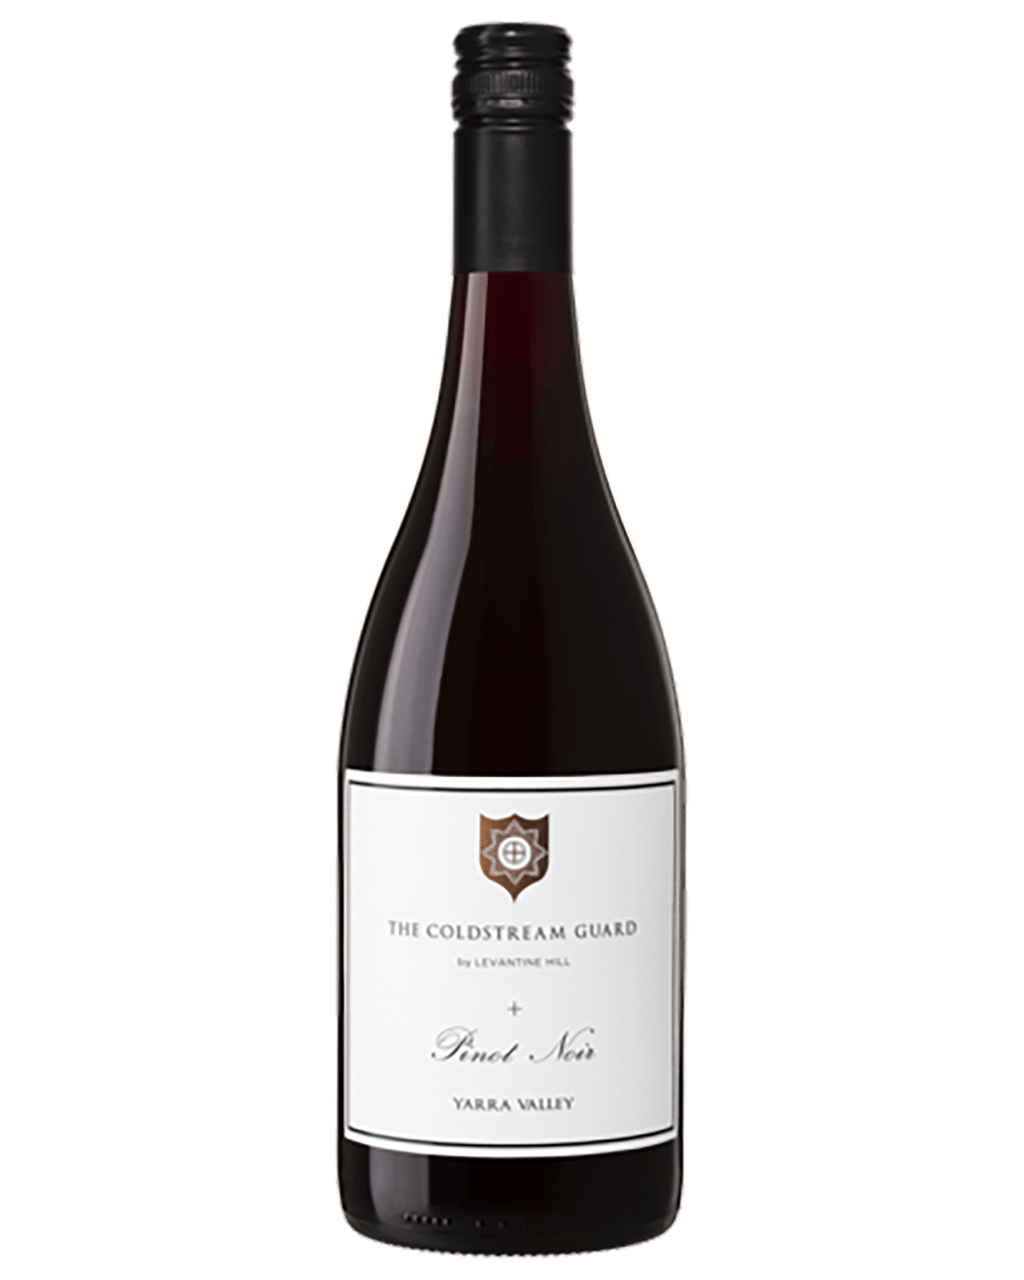 Buy The Coldstream Guard Pinot Noir Online (Lowest Price Guarantee ...